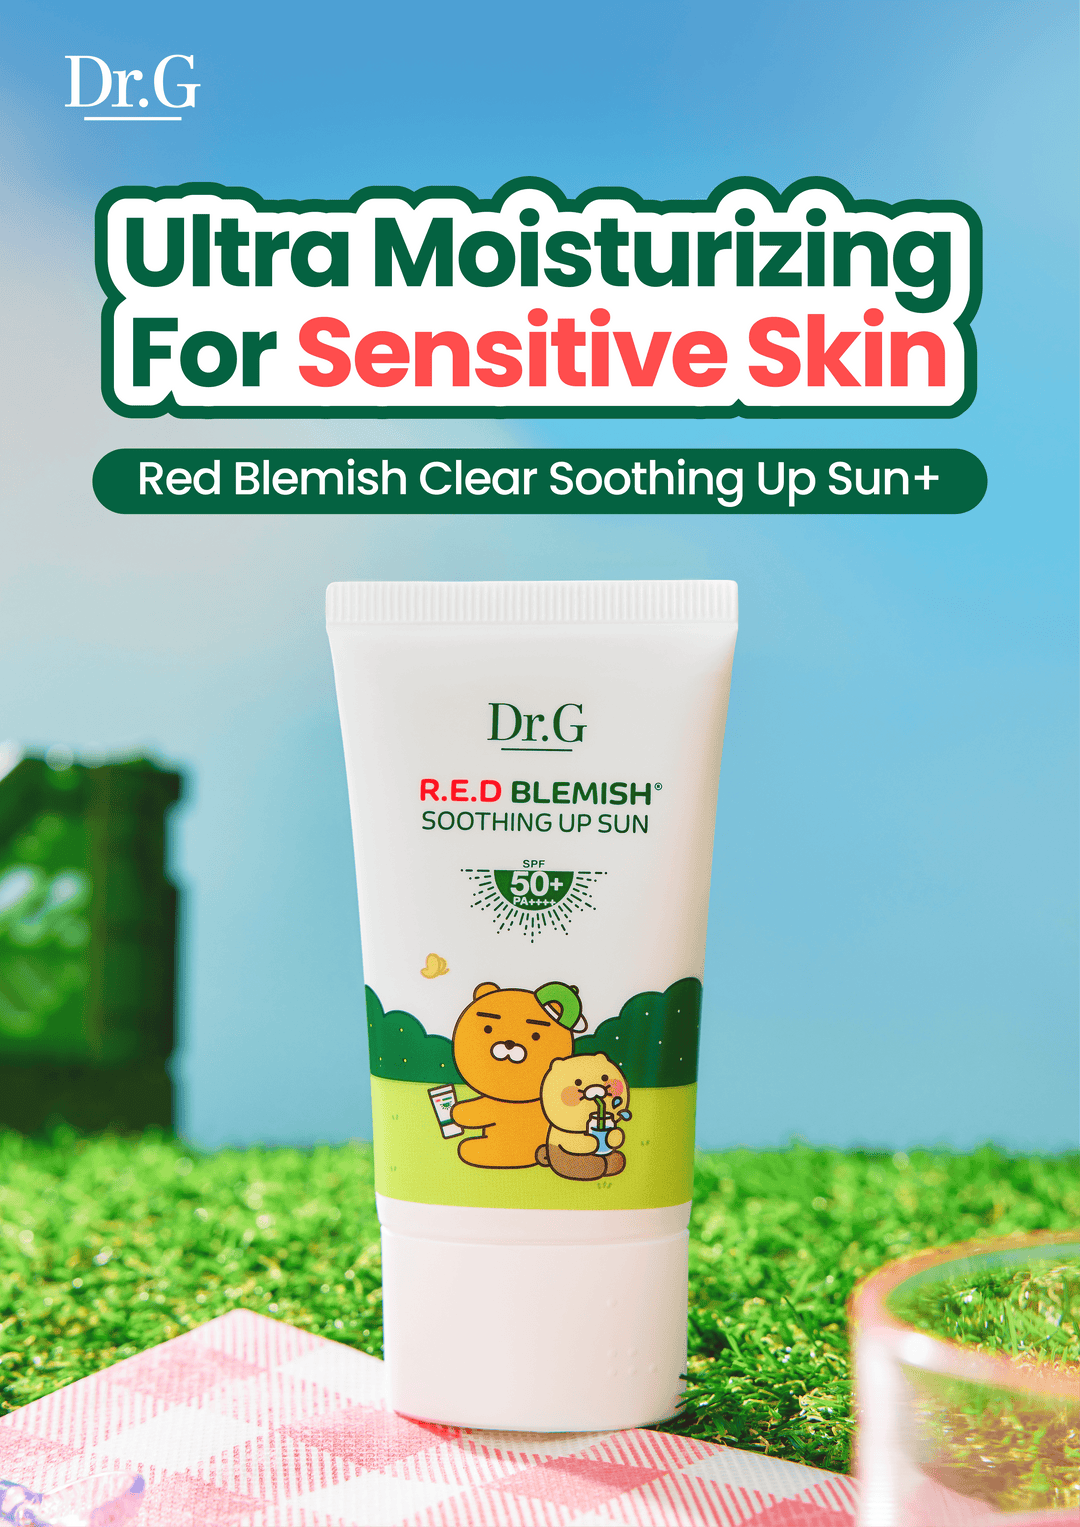 Dr.G X Kakao Friends Soothing Up Sun